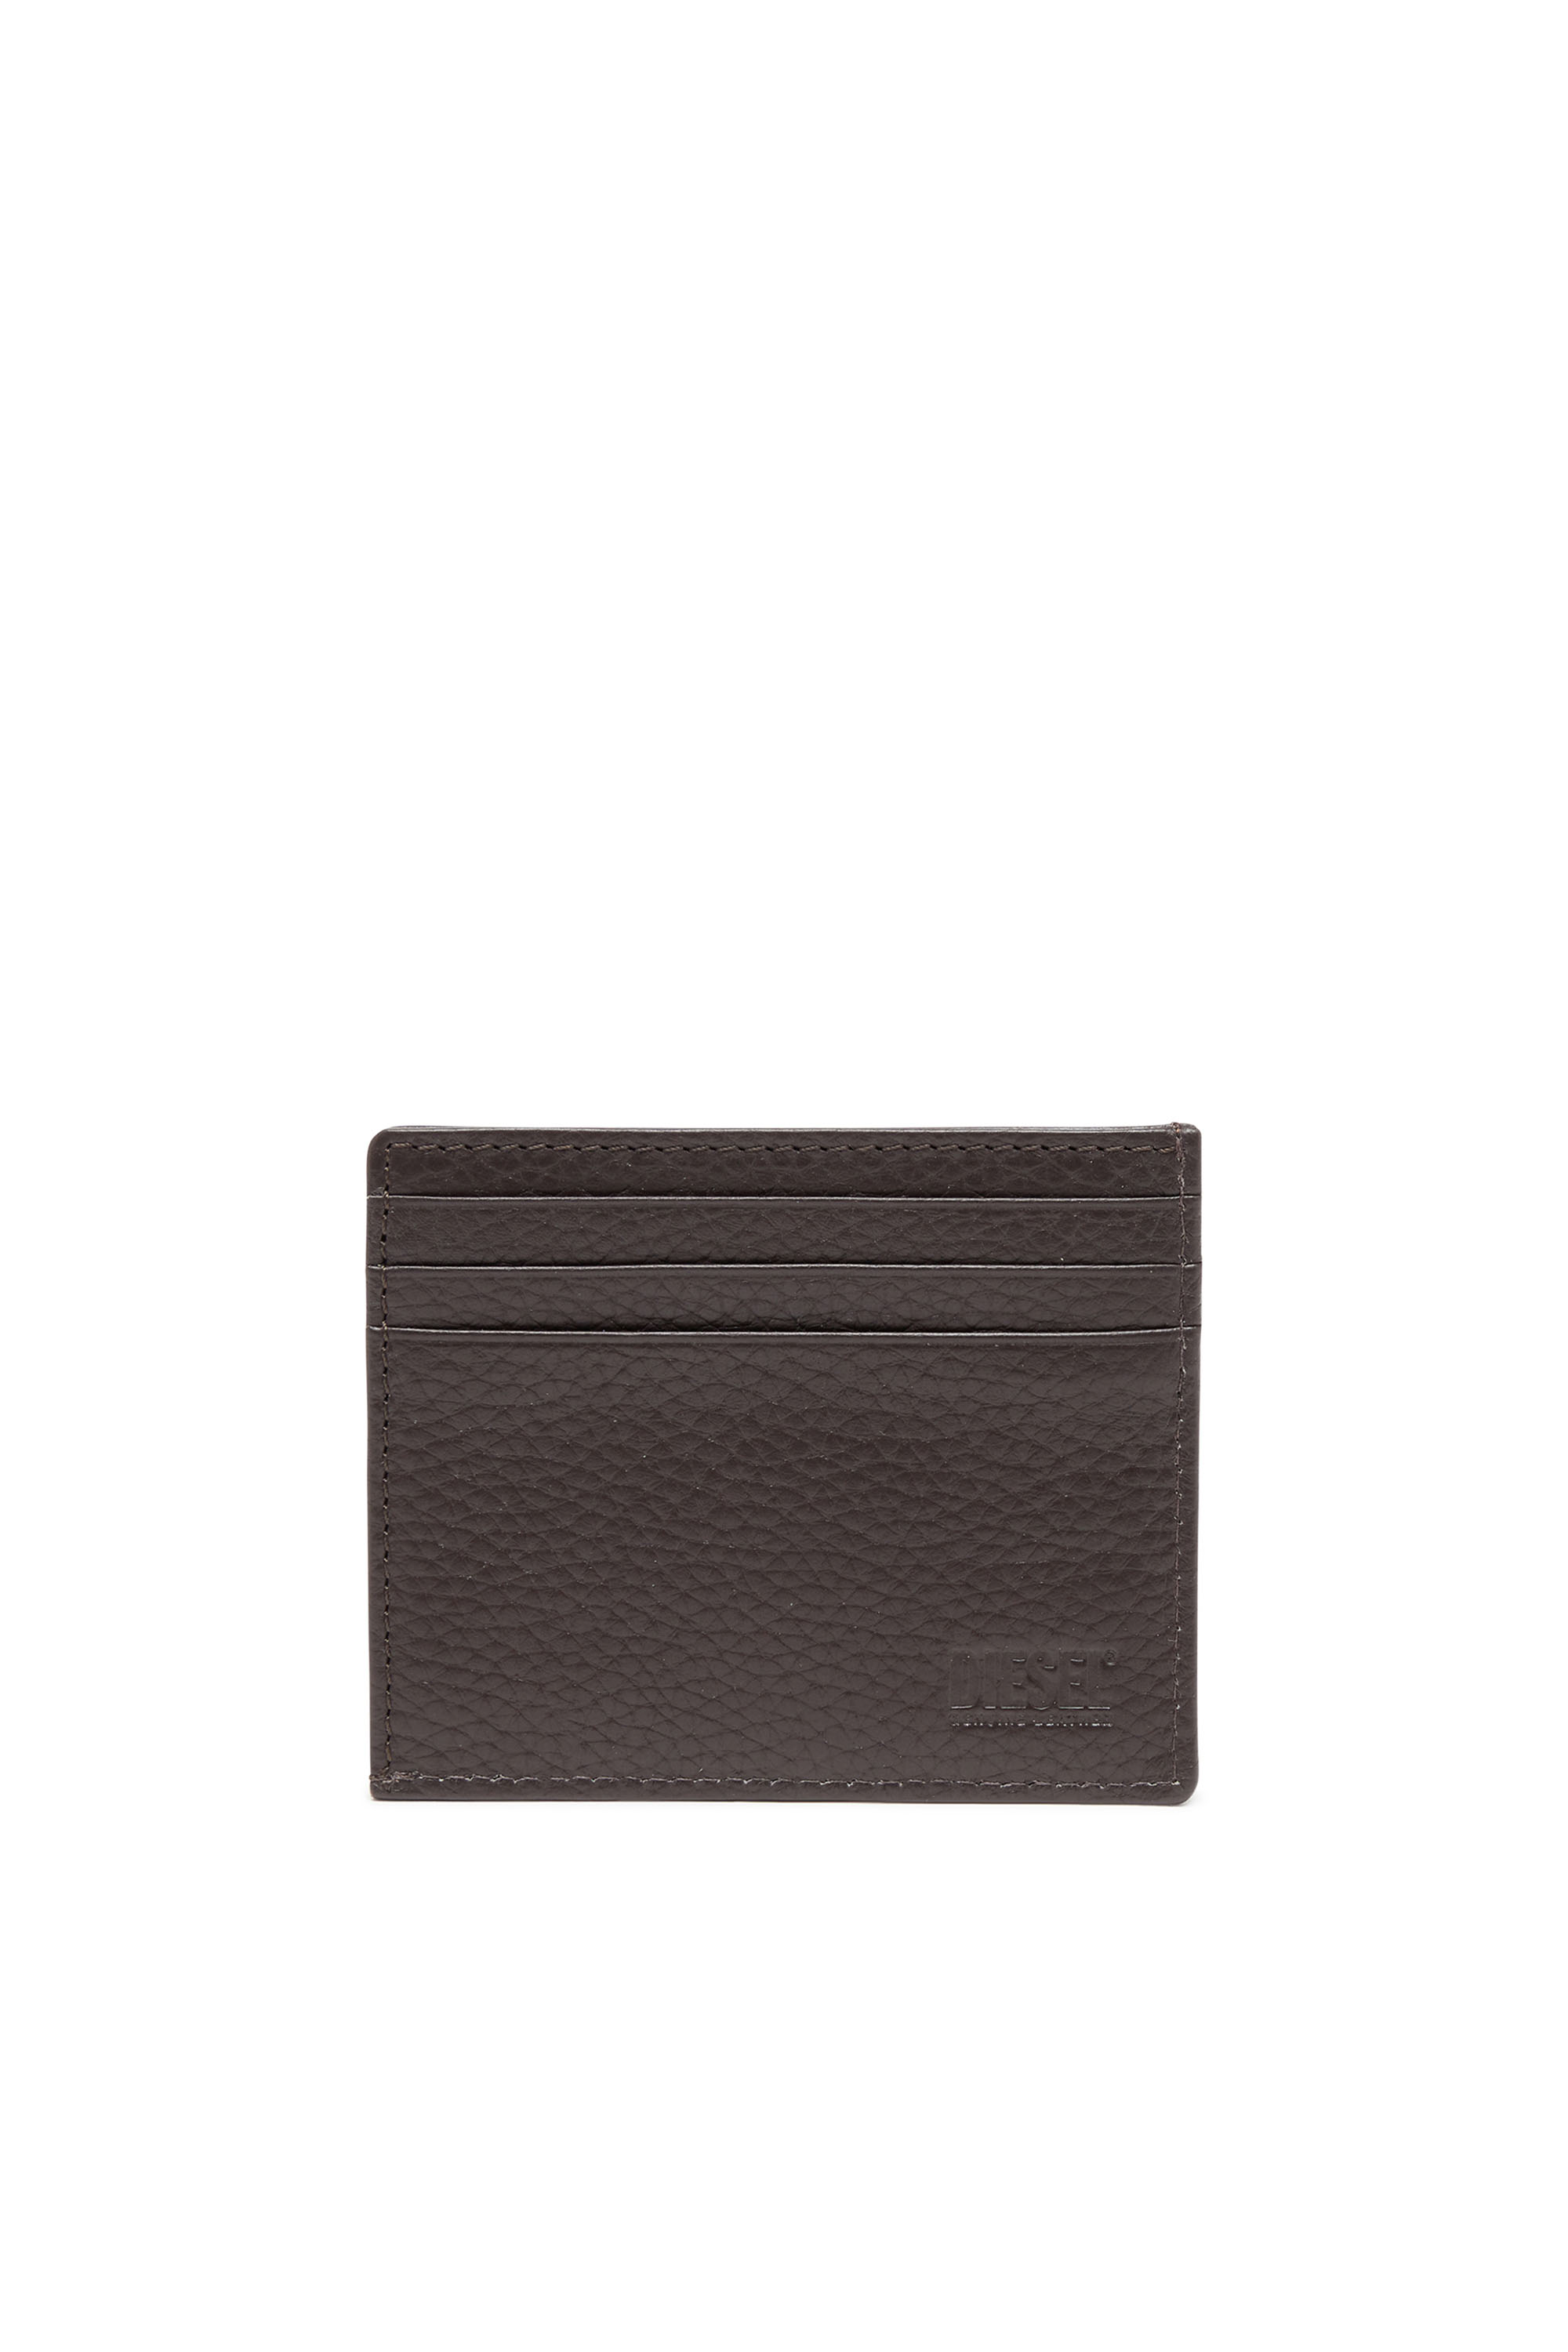 Diesel - CARD CASE, Man Card case in grained leather in Brown - Image 2